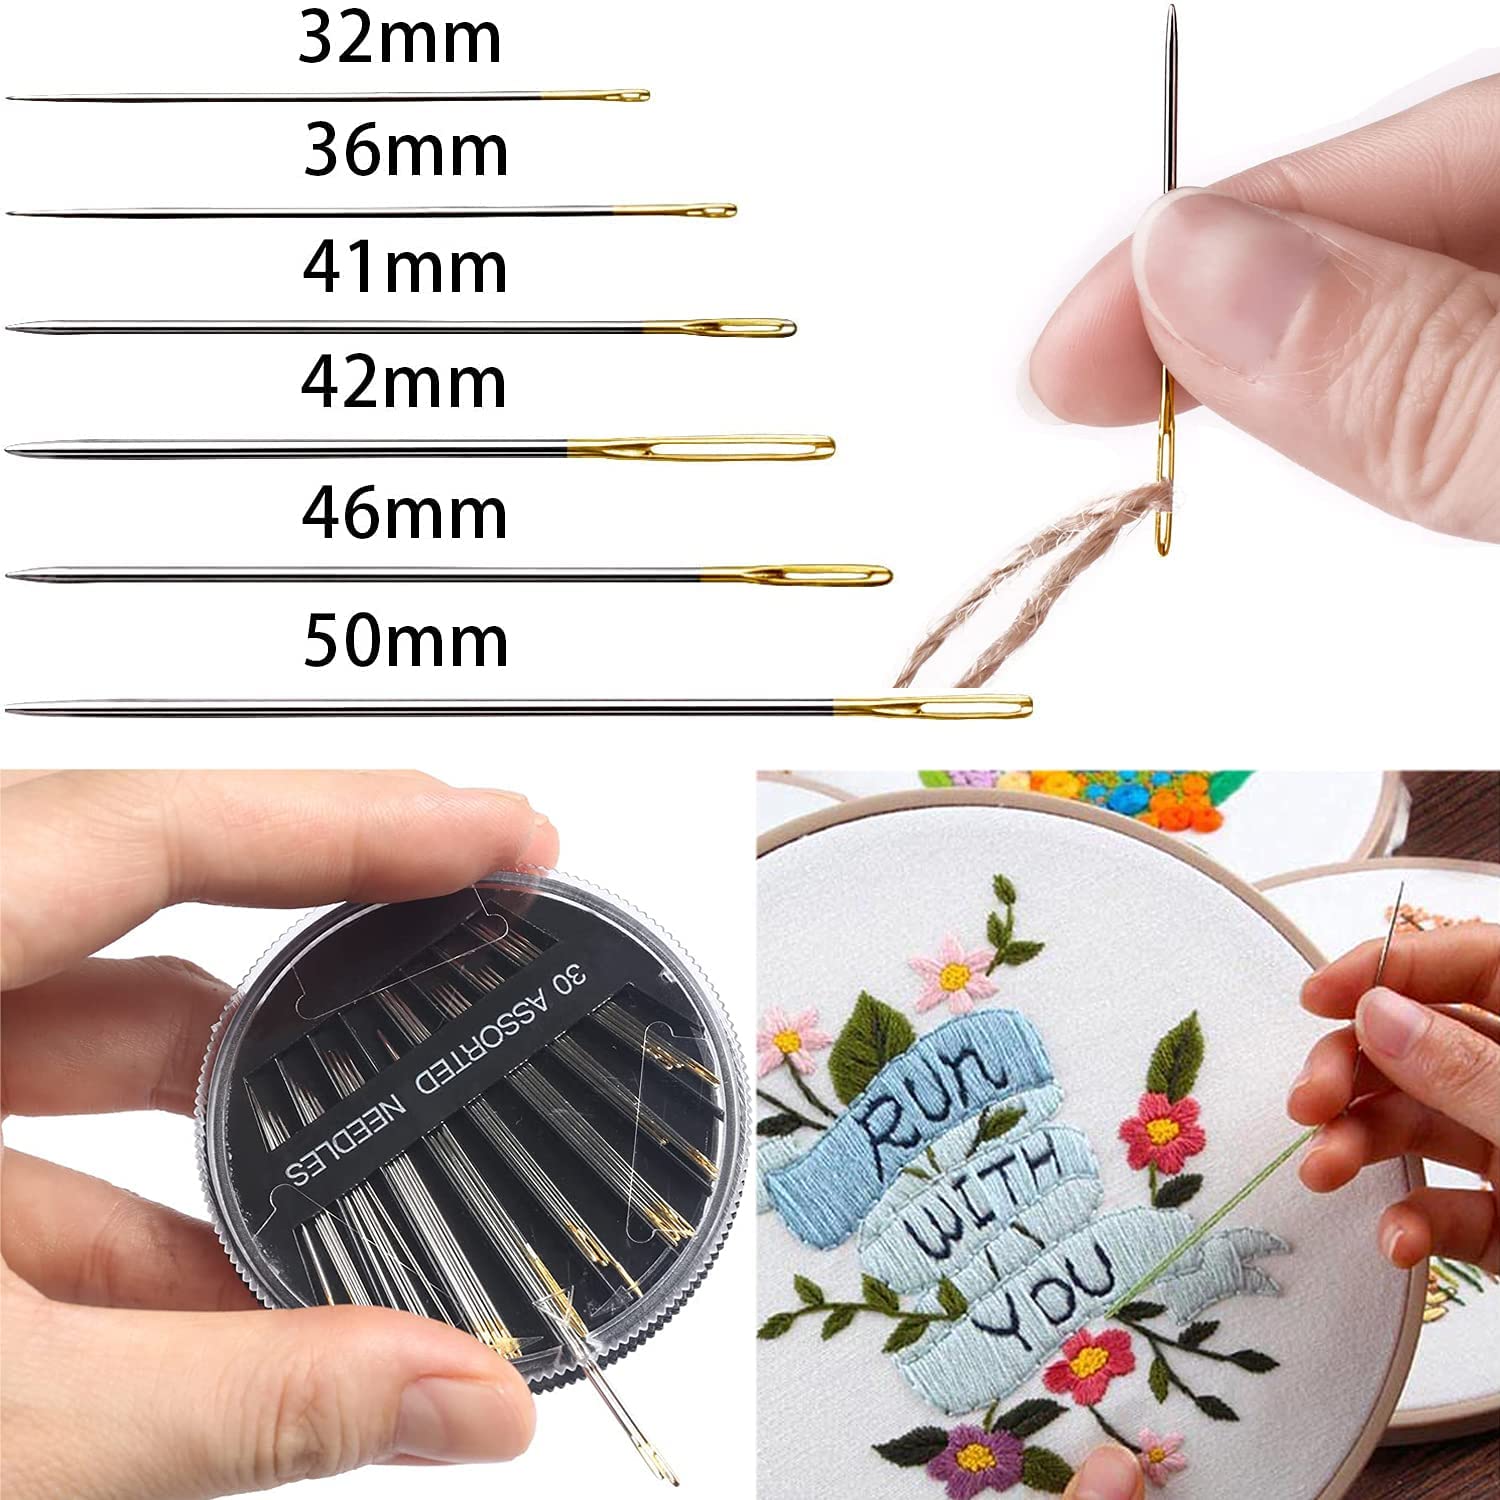 ShenMo Sewing needles, hand needles, 30 sewing needles, hand sewing  needles, embroidery needles, including all lengths required for hand sewing  (3.1cm 5.1cm)